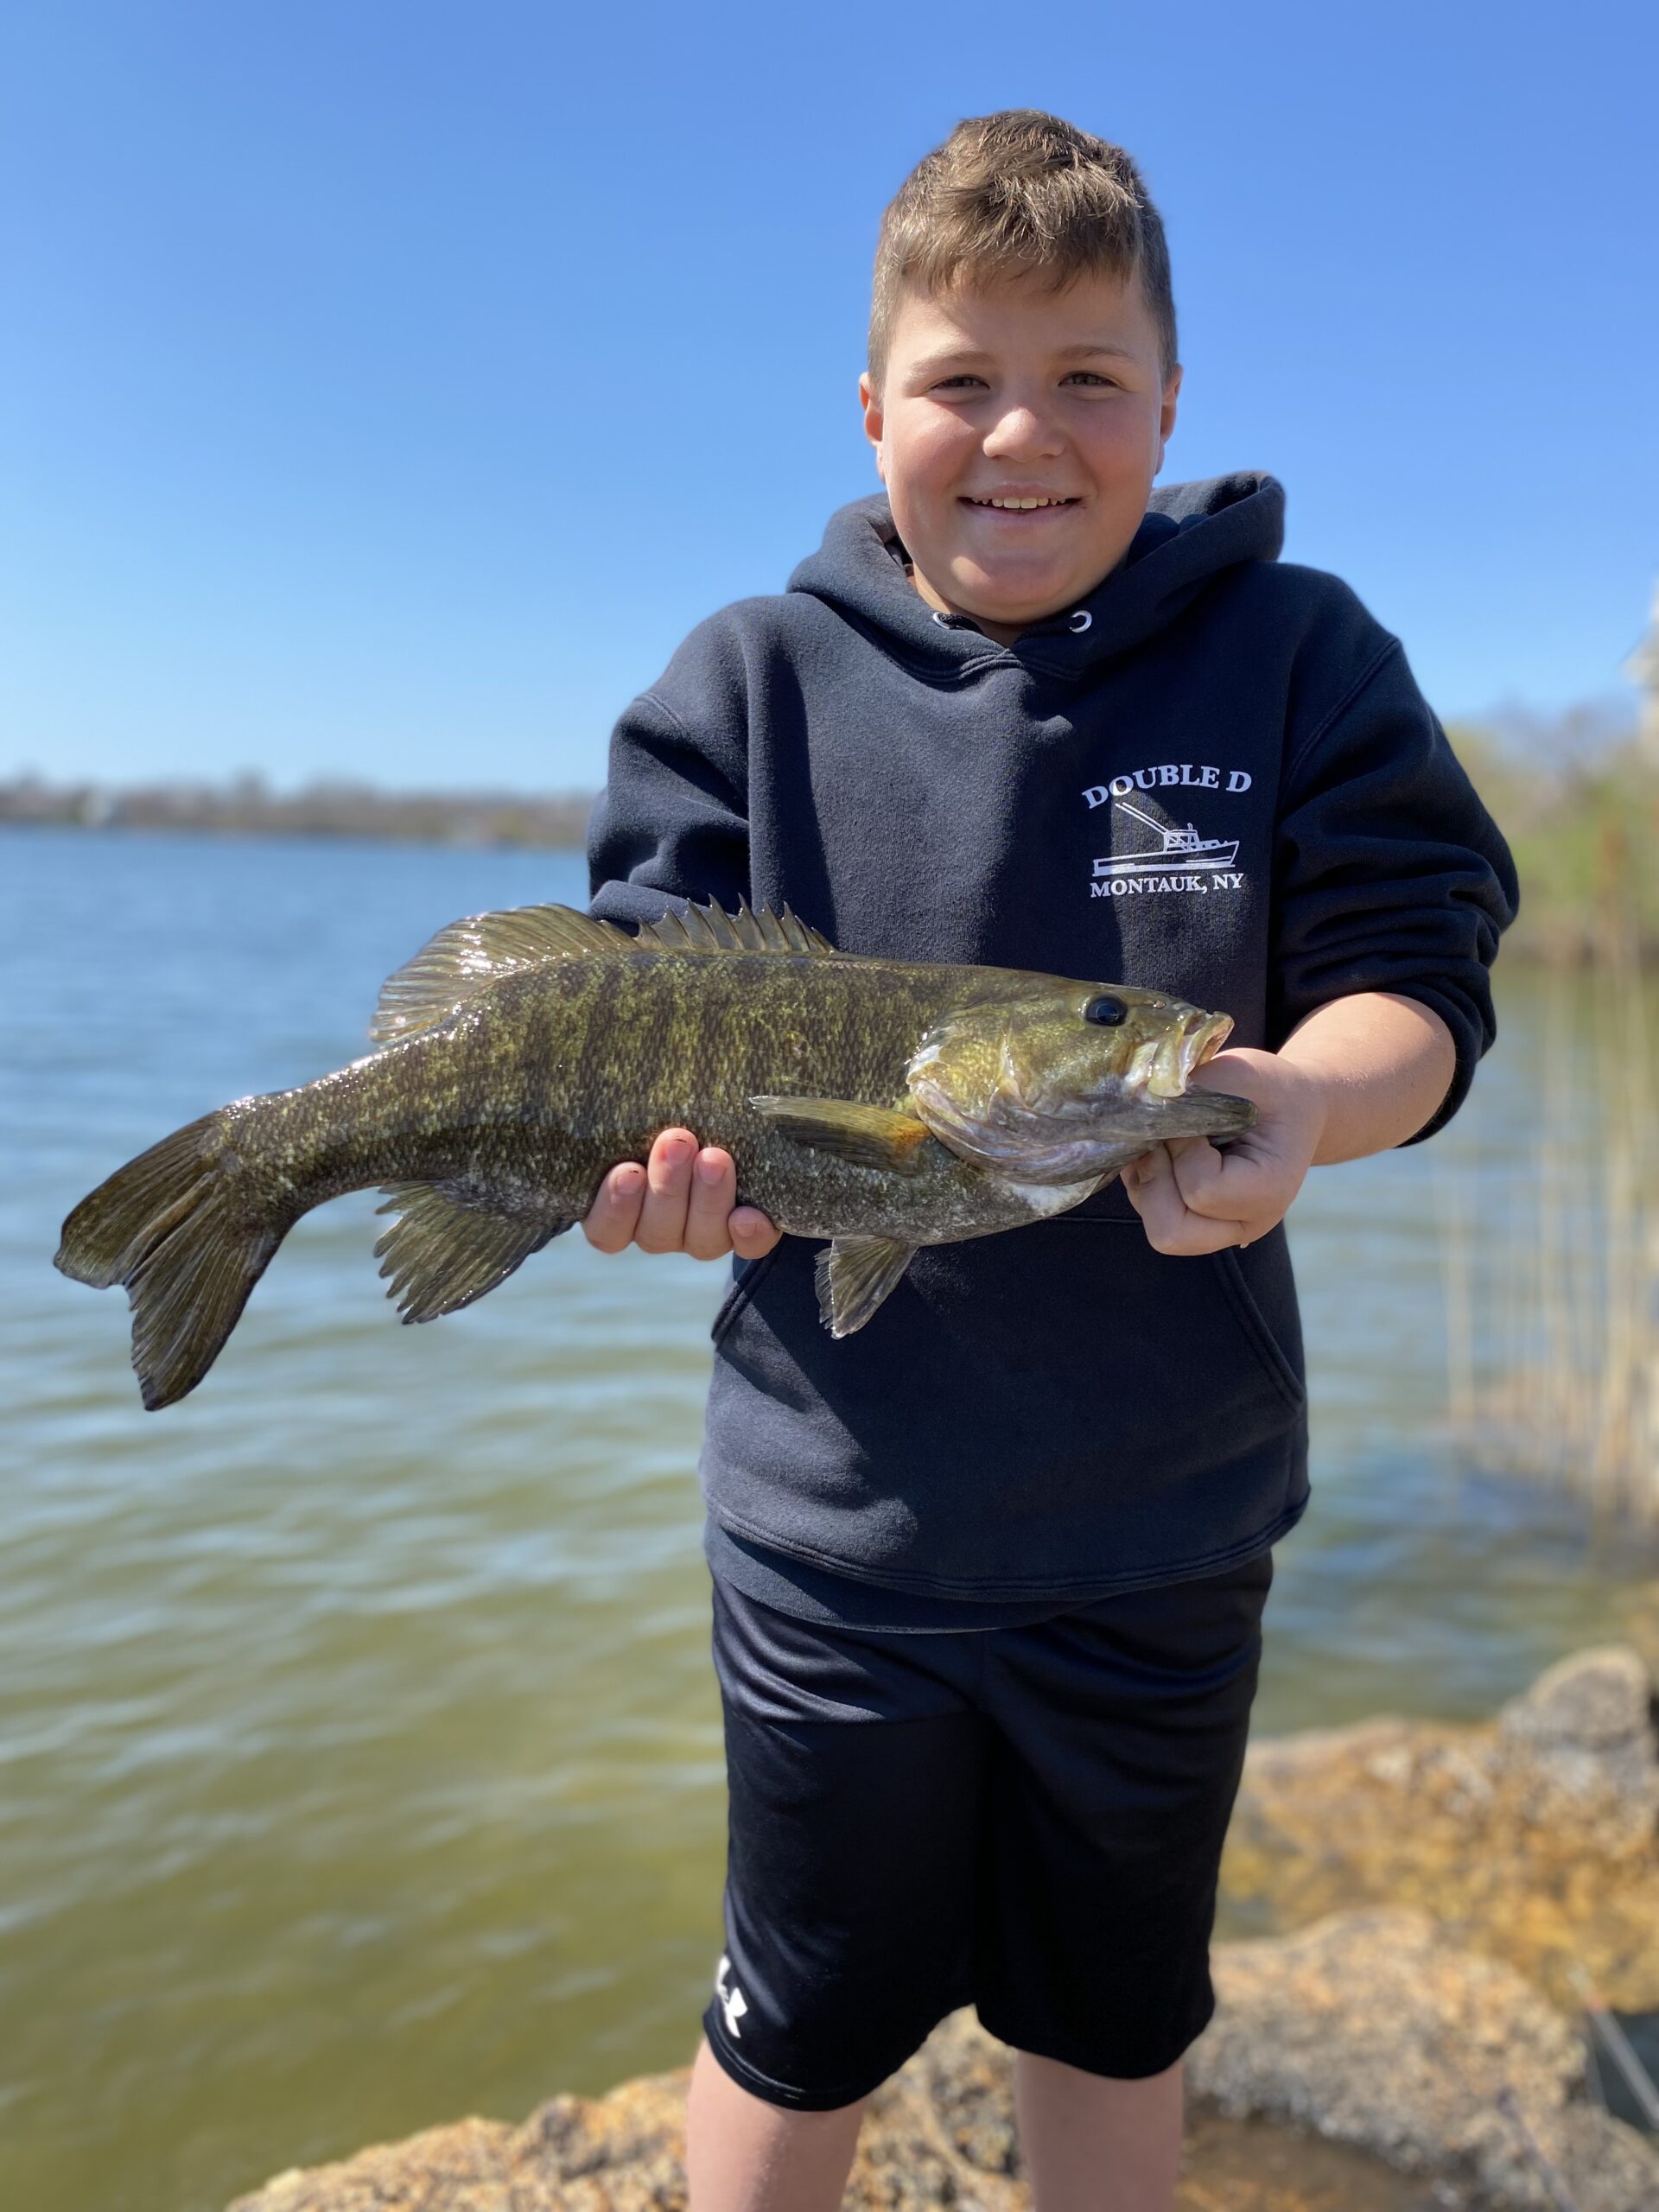 Jake Giunta pulled this trophy-sized smallmouth bass out of the local freshwater recently while fishing with his dad, Capt. Dan Giunta of the Montauk charter boat Double D. 